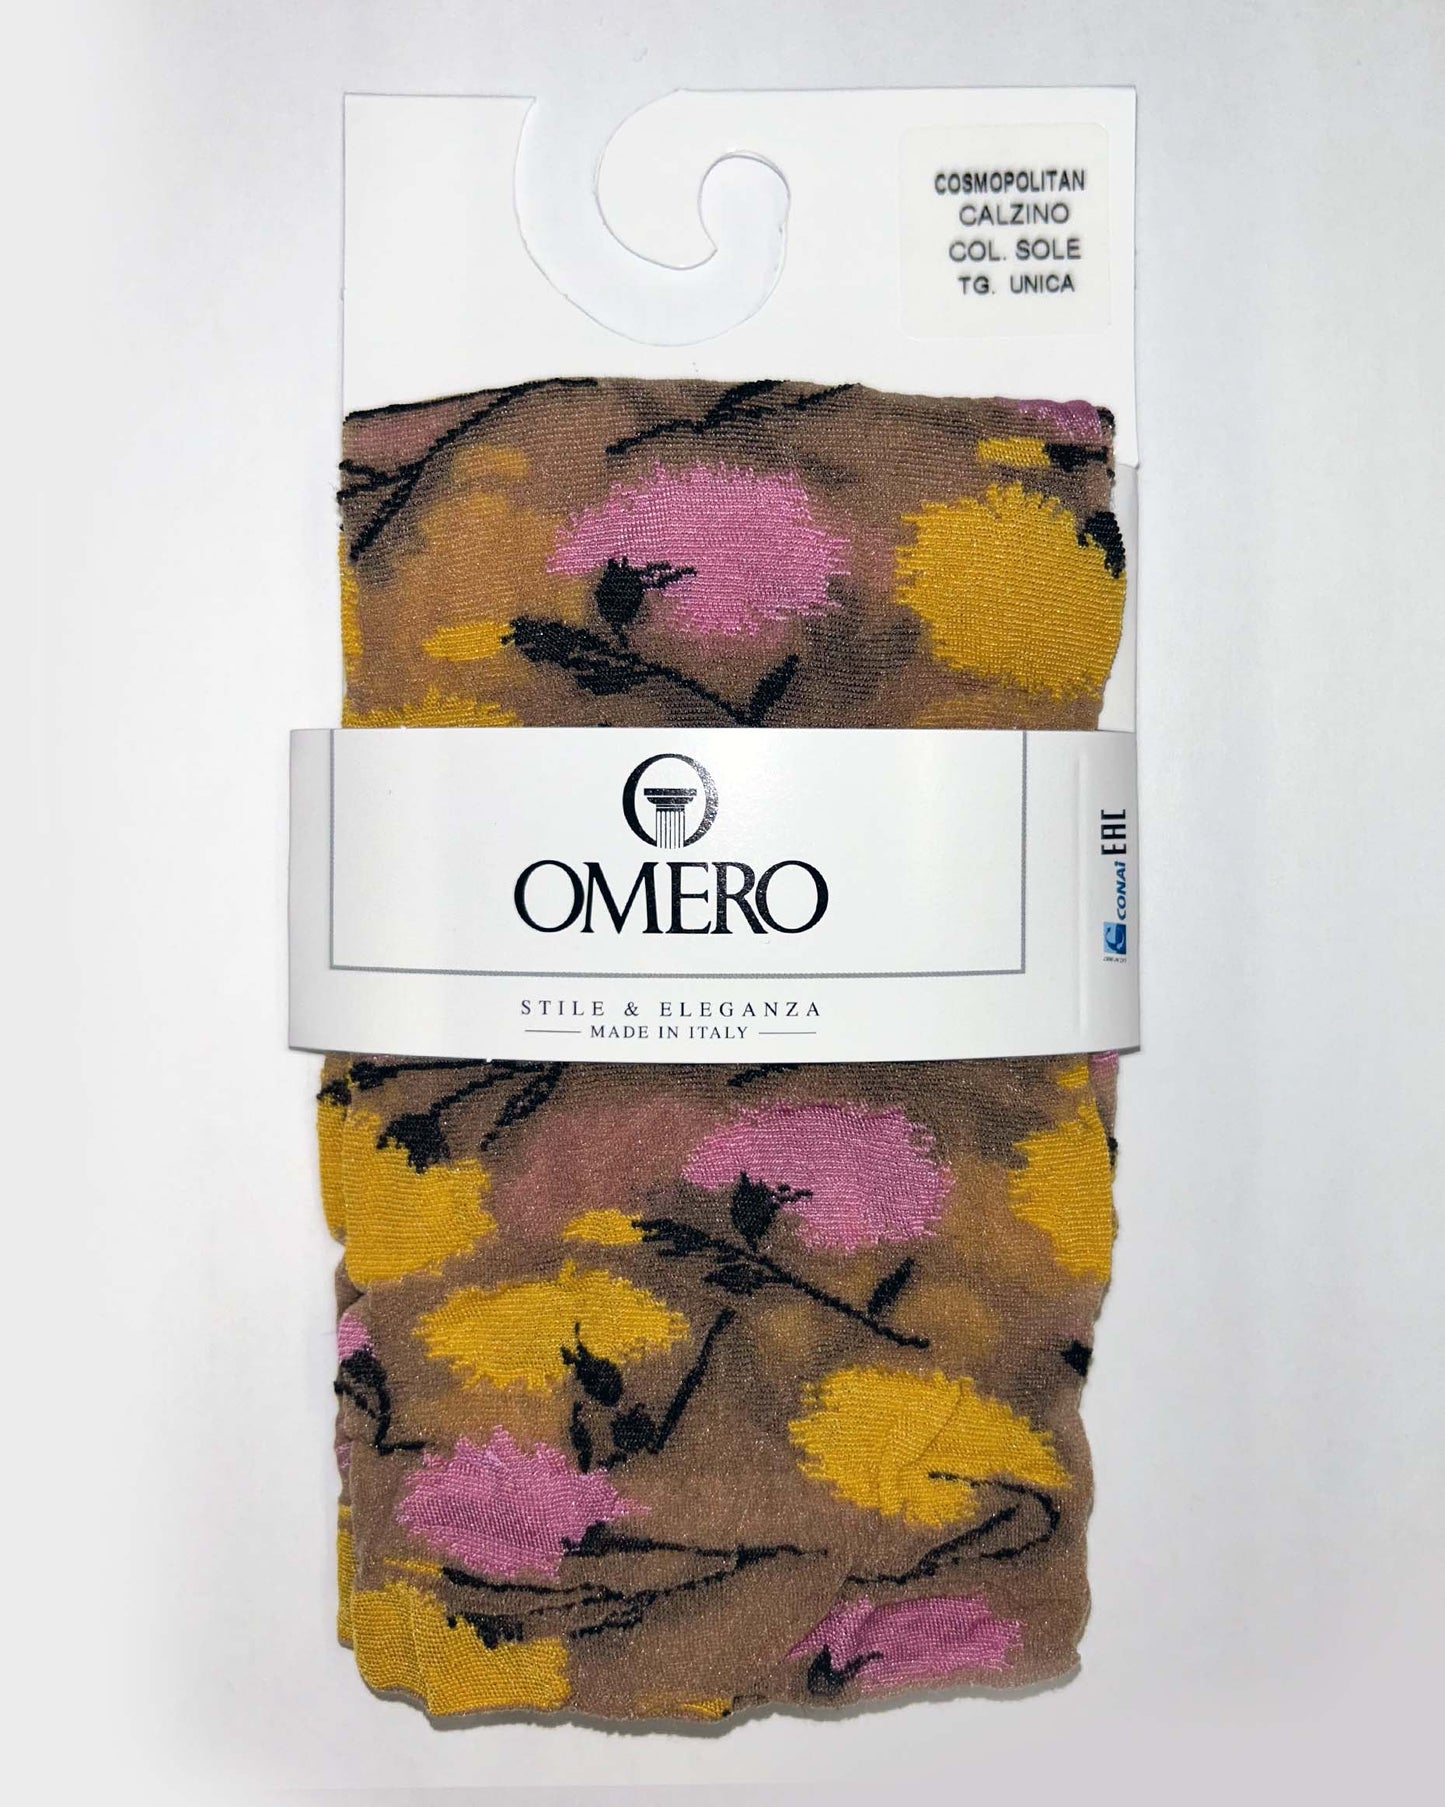 Omero Cosmopolitan Calzino - Sheer nude fashion ankle sock with a woven flower pattern in yellow and pink and invisible elasticated comfort cuff.